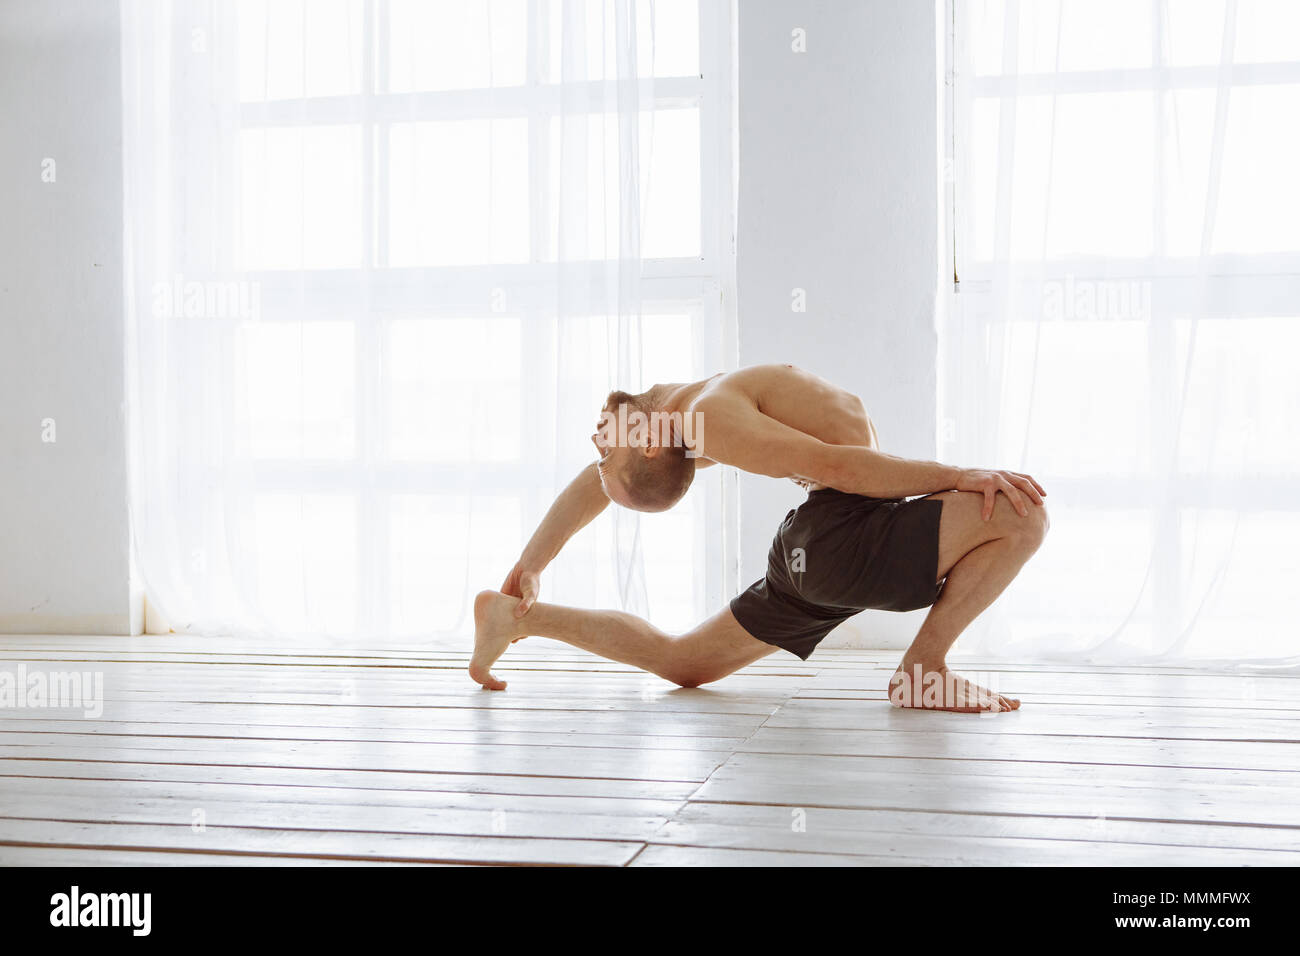 Woman Practicing Advanced Yoga. a Series of Yoga Poses Stock Image - Image  of practicing, strength: 89493841